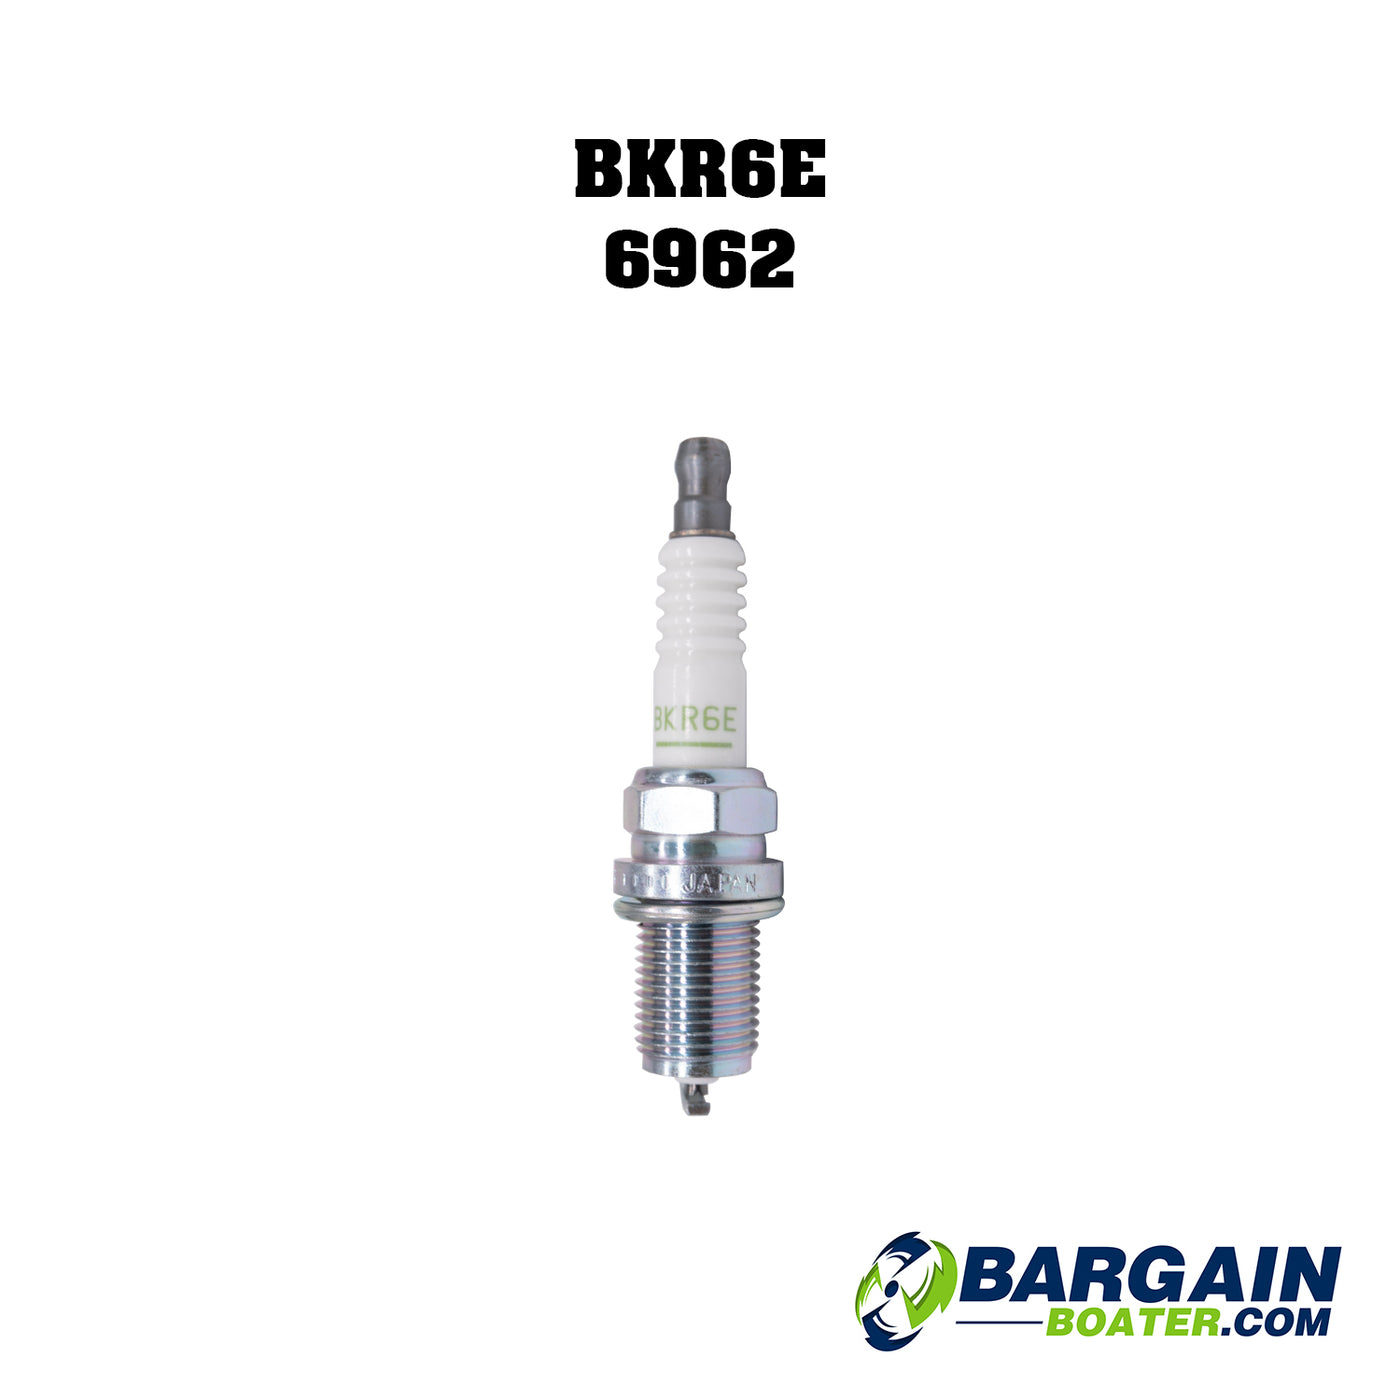 This is an NGK BKR6E 6962 Spark Plug for Evinrude/Johnson 2-Stroke outboard motors (5033634).